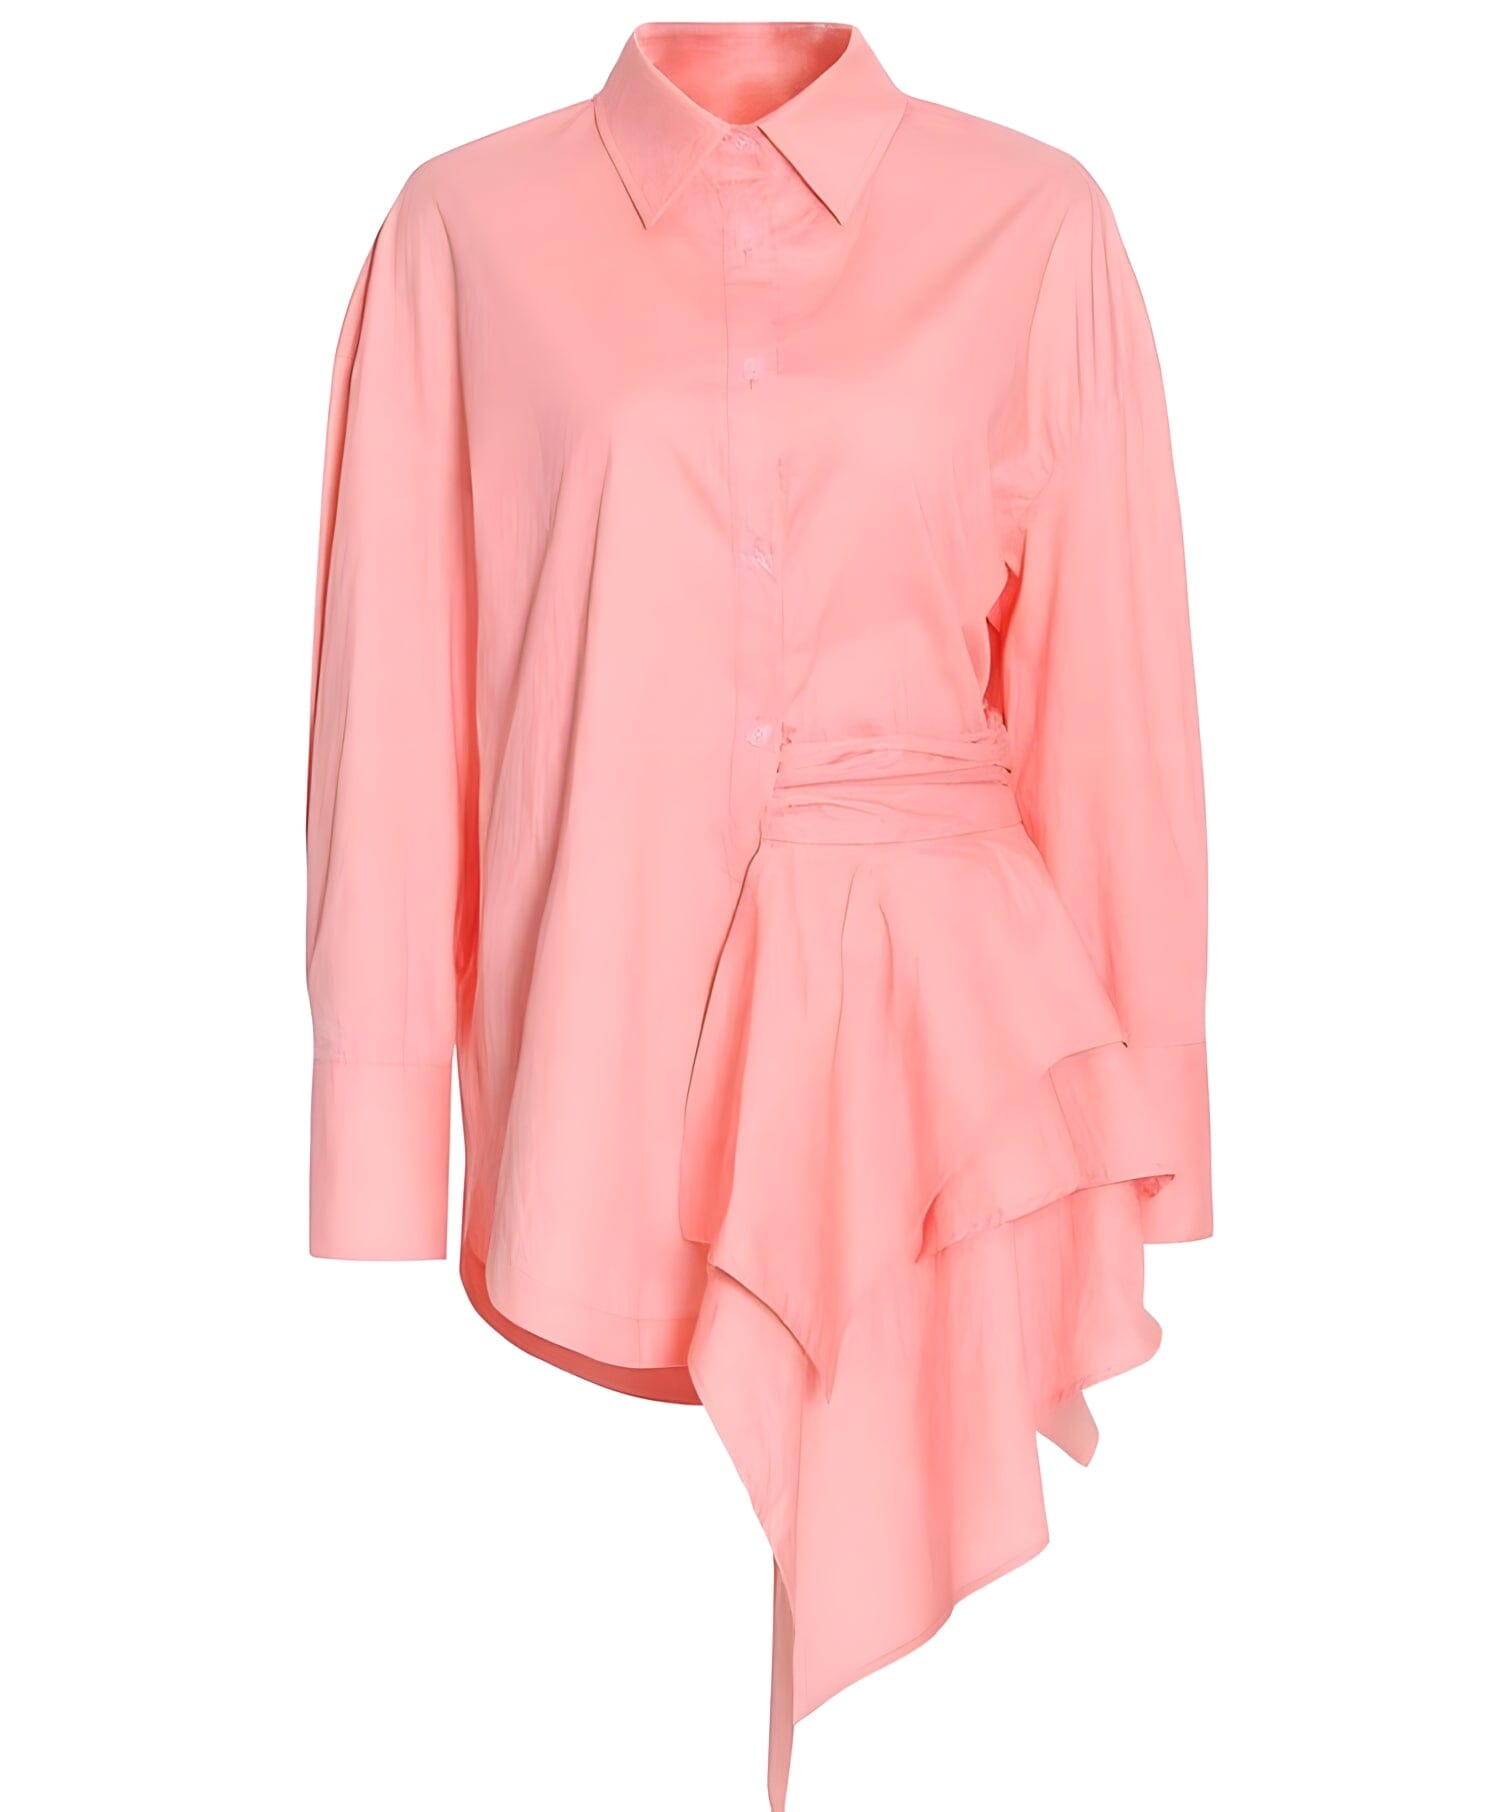 The Ashlyn Ruched Long Sleeve Blouse - Multiple Colors 0 SA Styles Pink S 